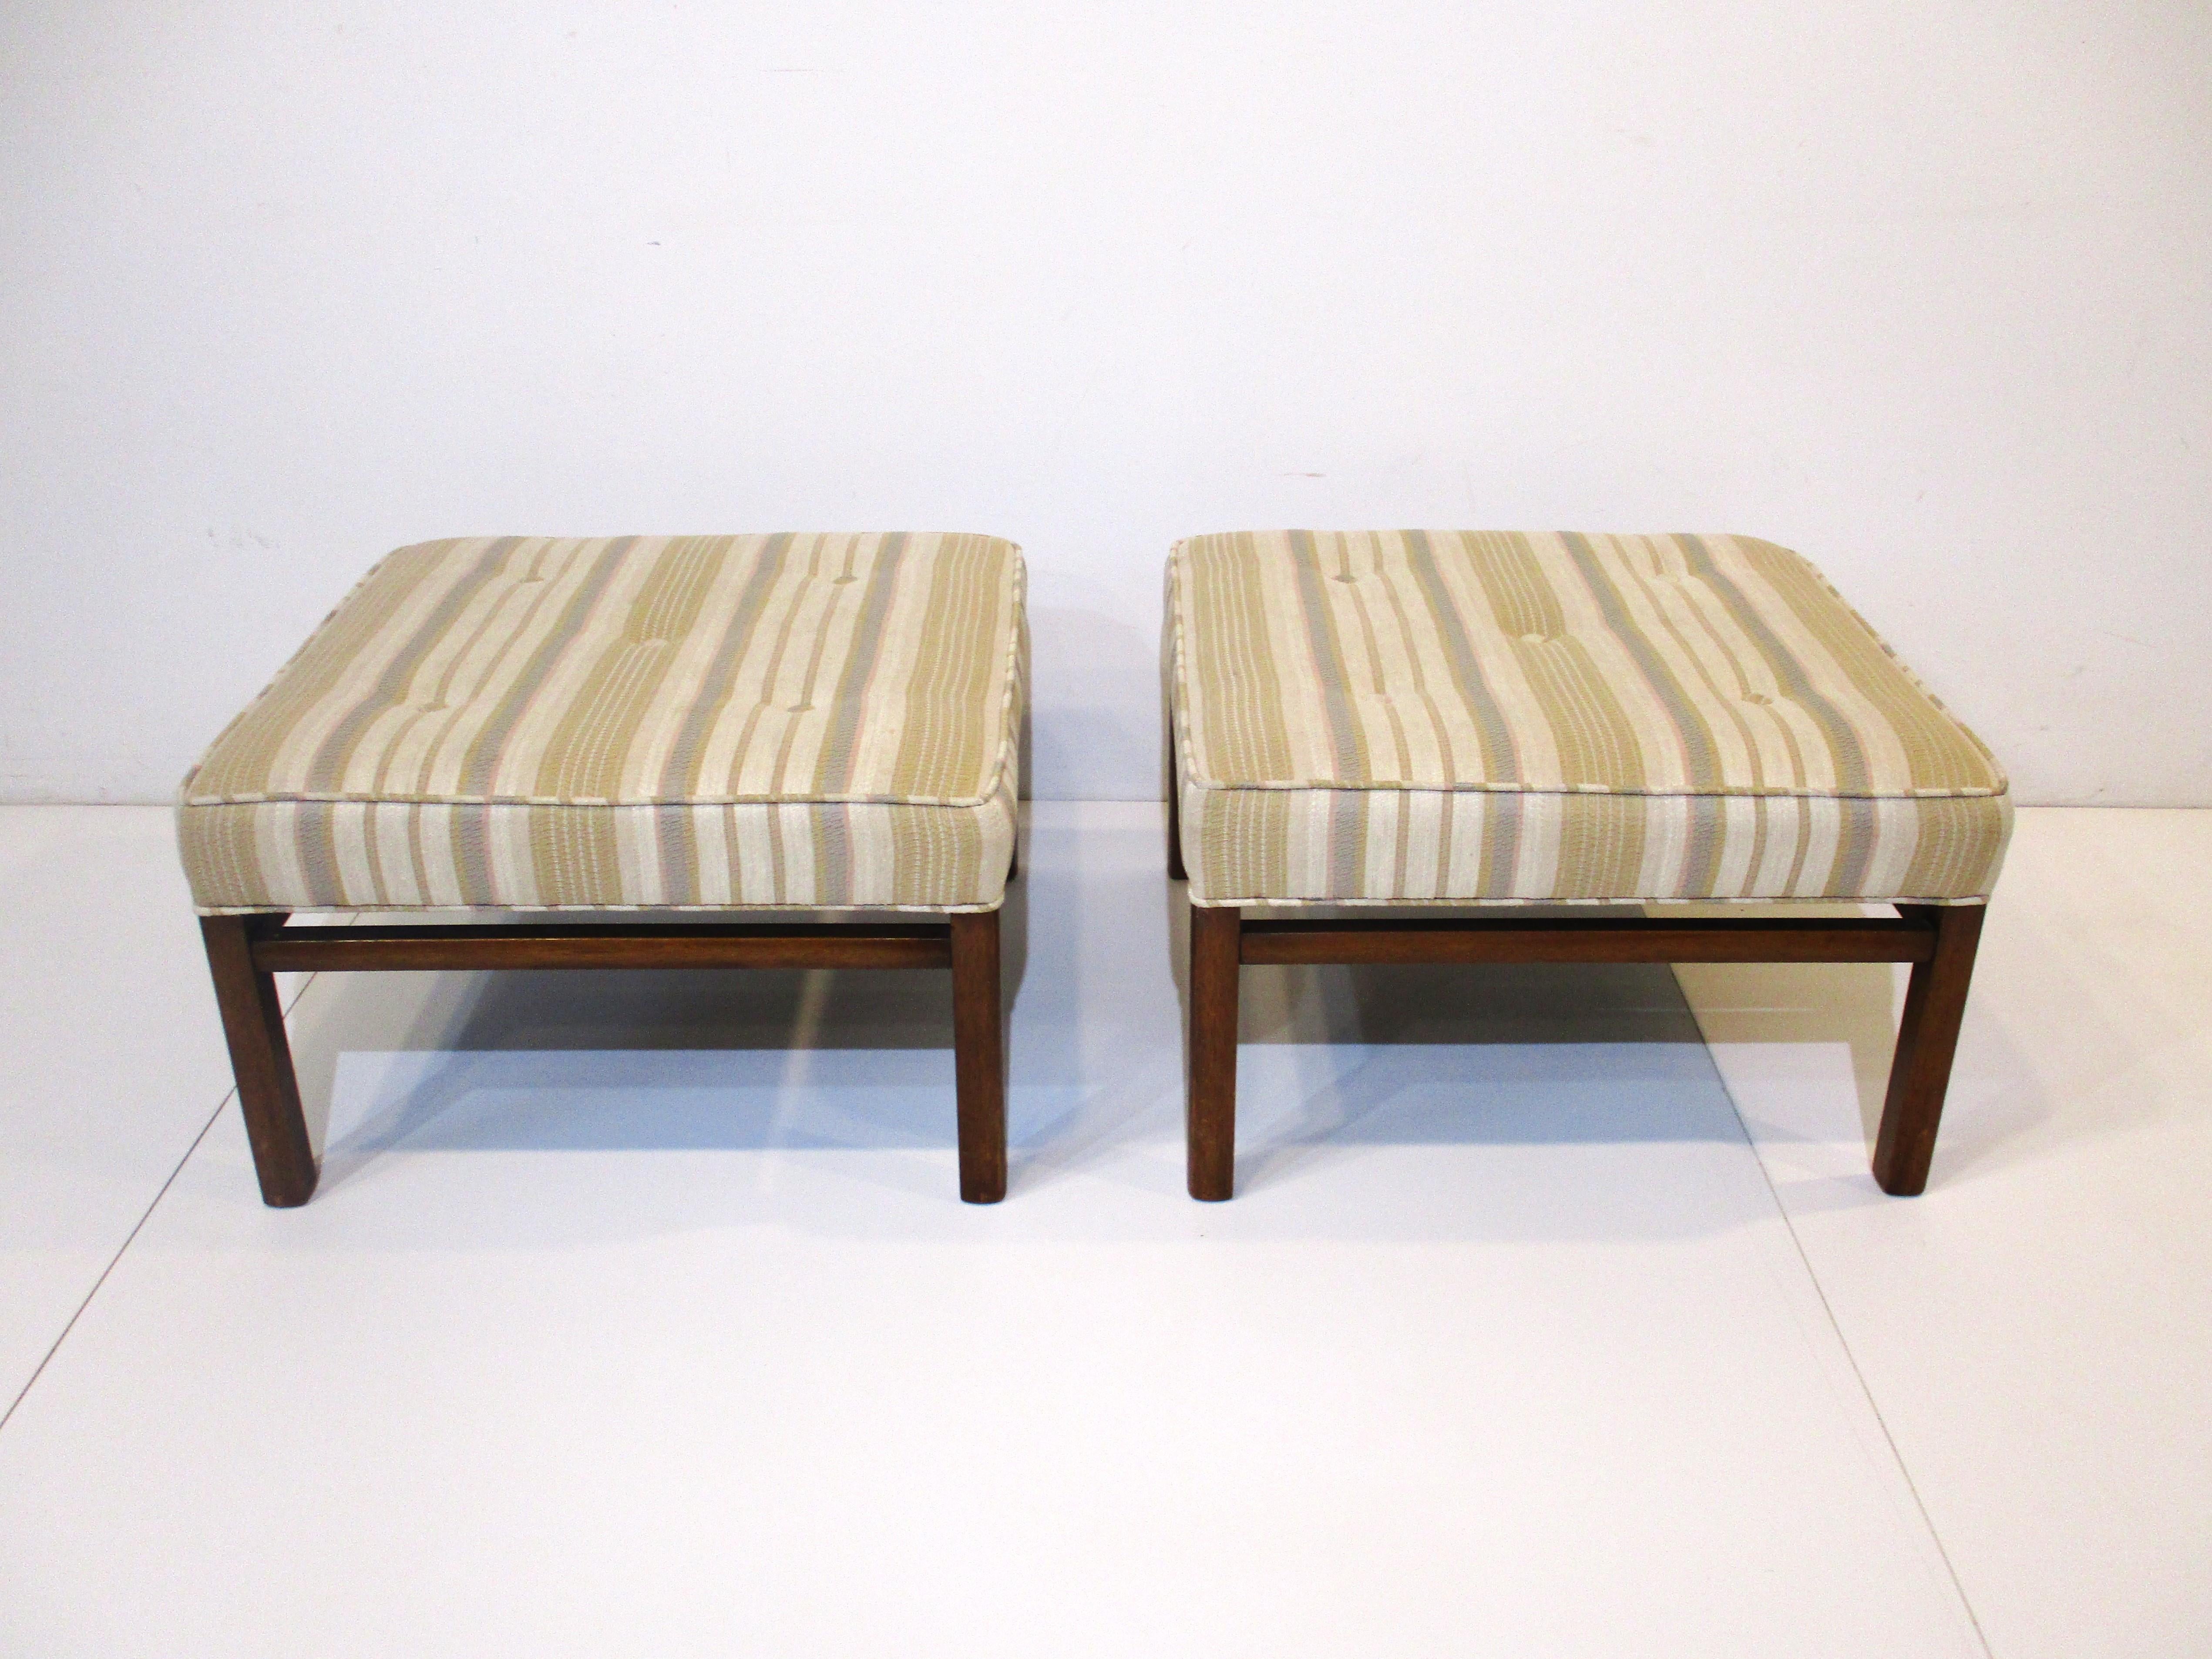 Upholstered Ottomans / Stools in the Style of Harvery Probber 3